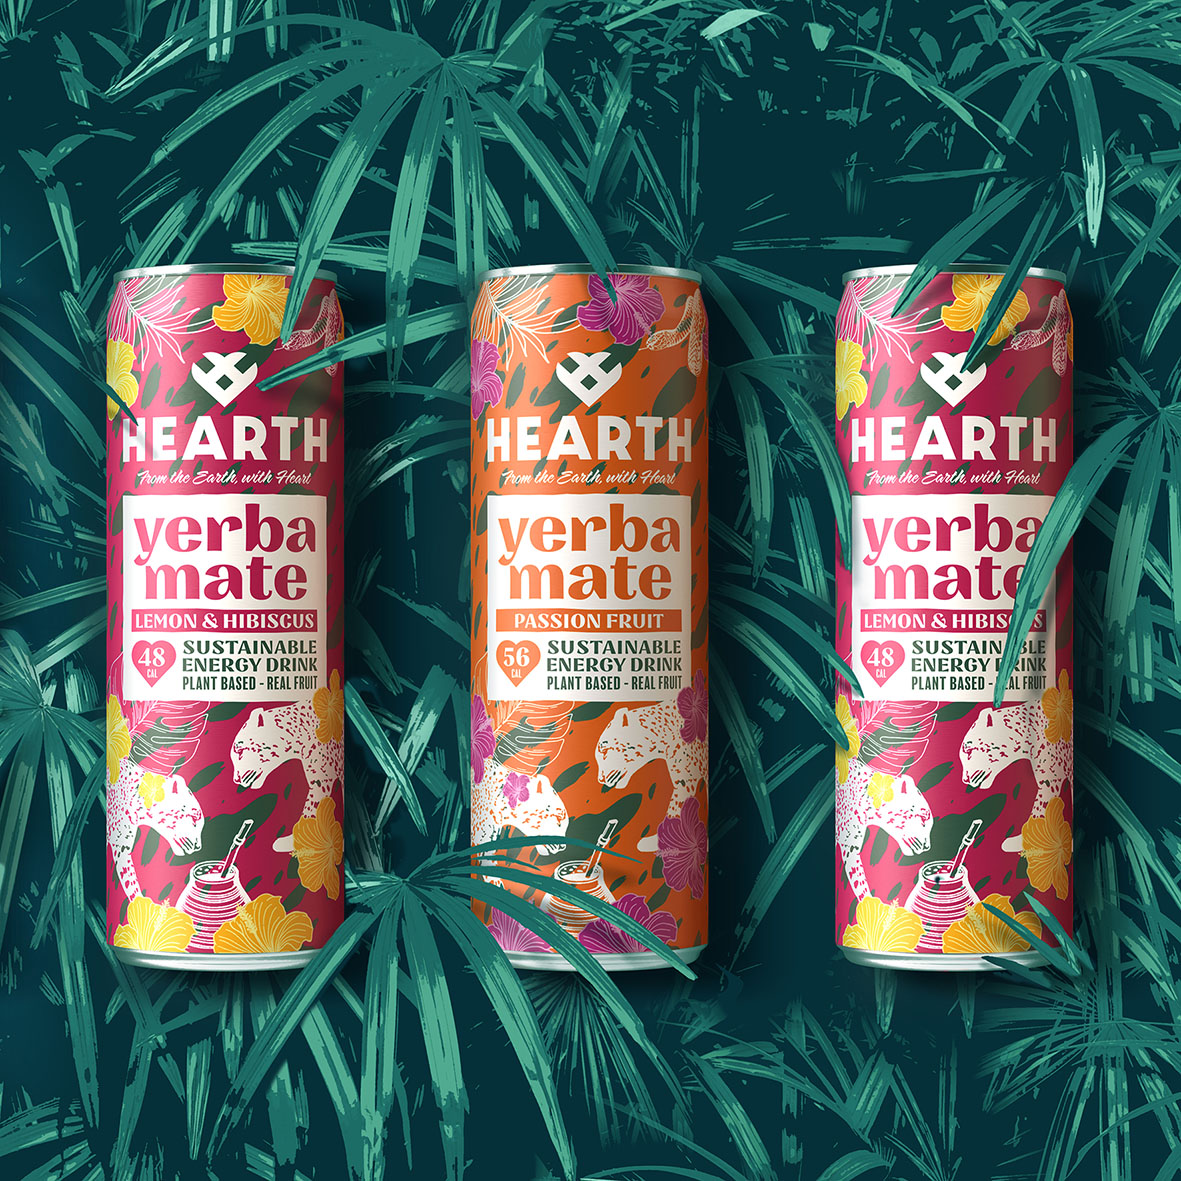 Butterfly Cannon Puts the Heart Back Into Hearth Yerba Mate with Their Brand Refresh